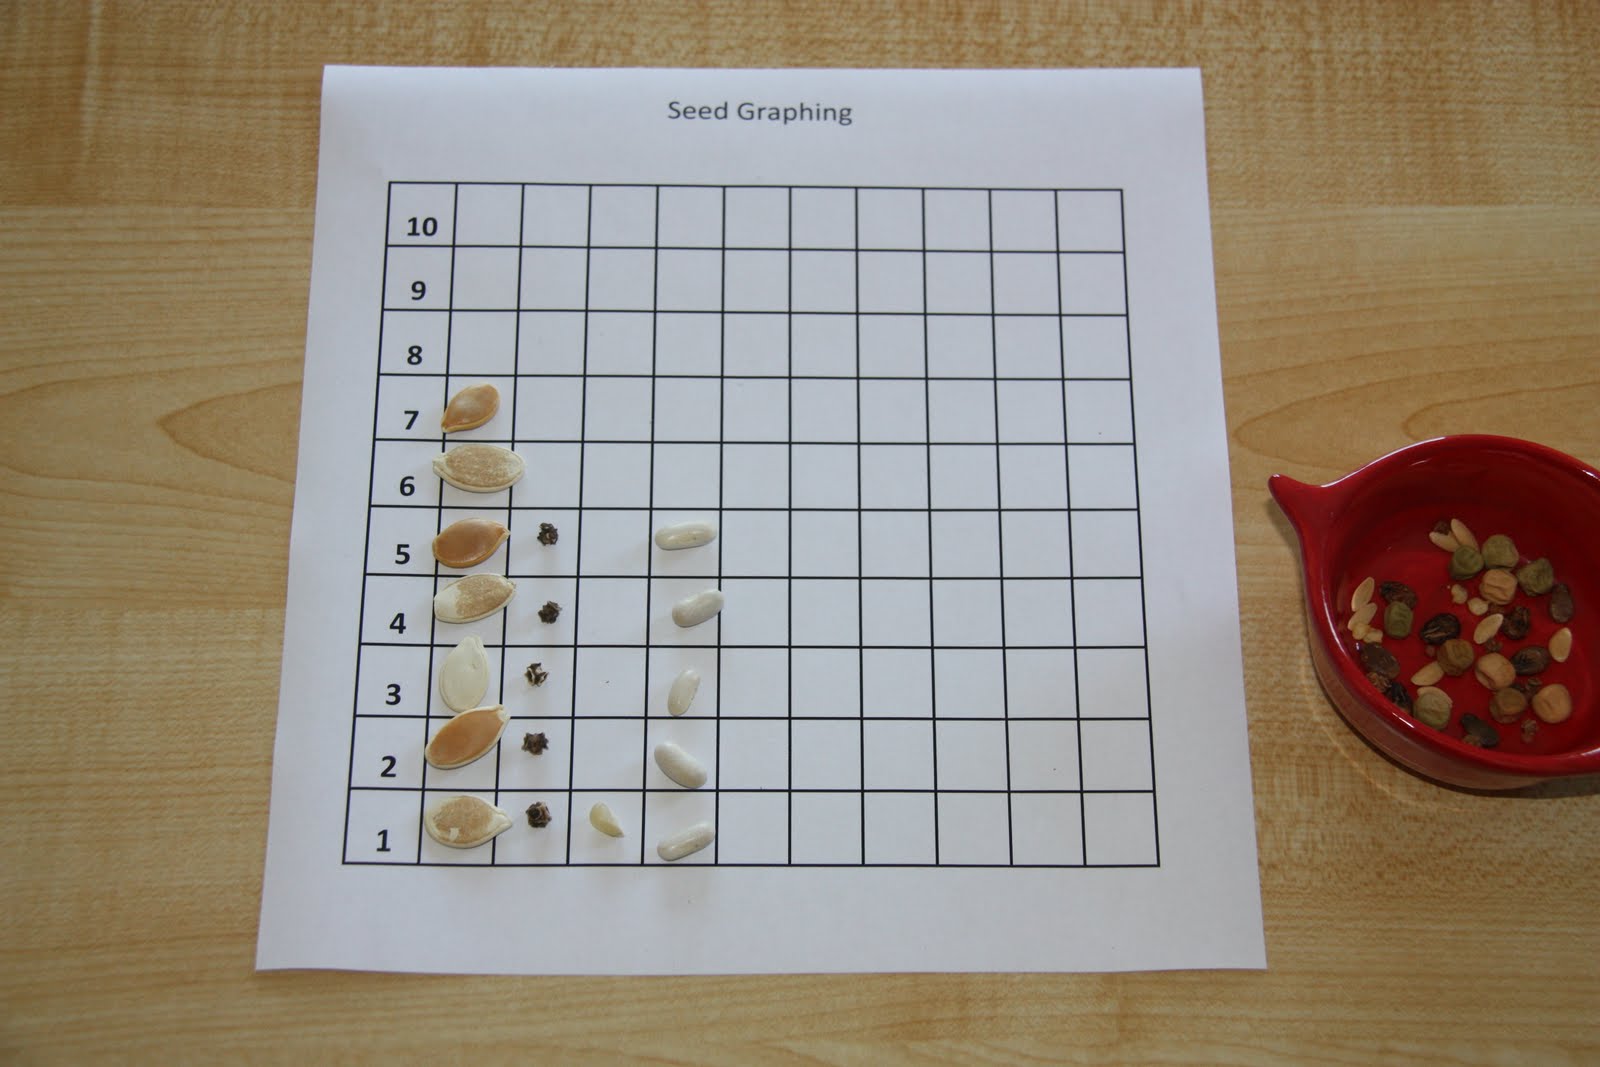 Seed Graphing (Photo from Counting Coconuts)